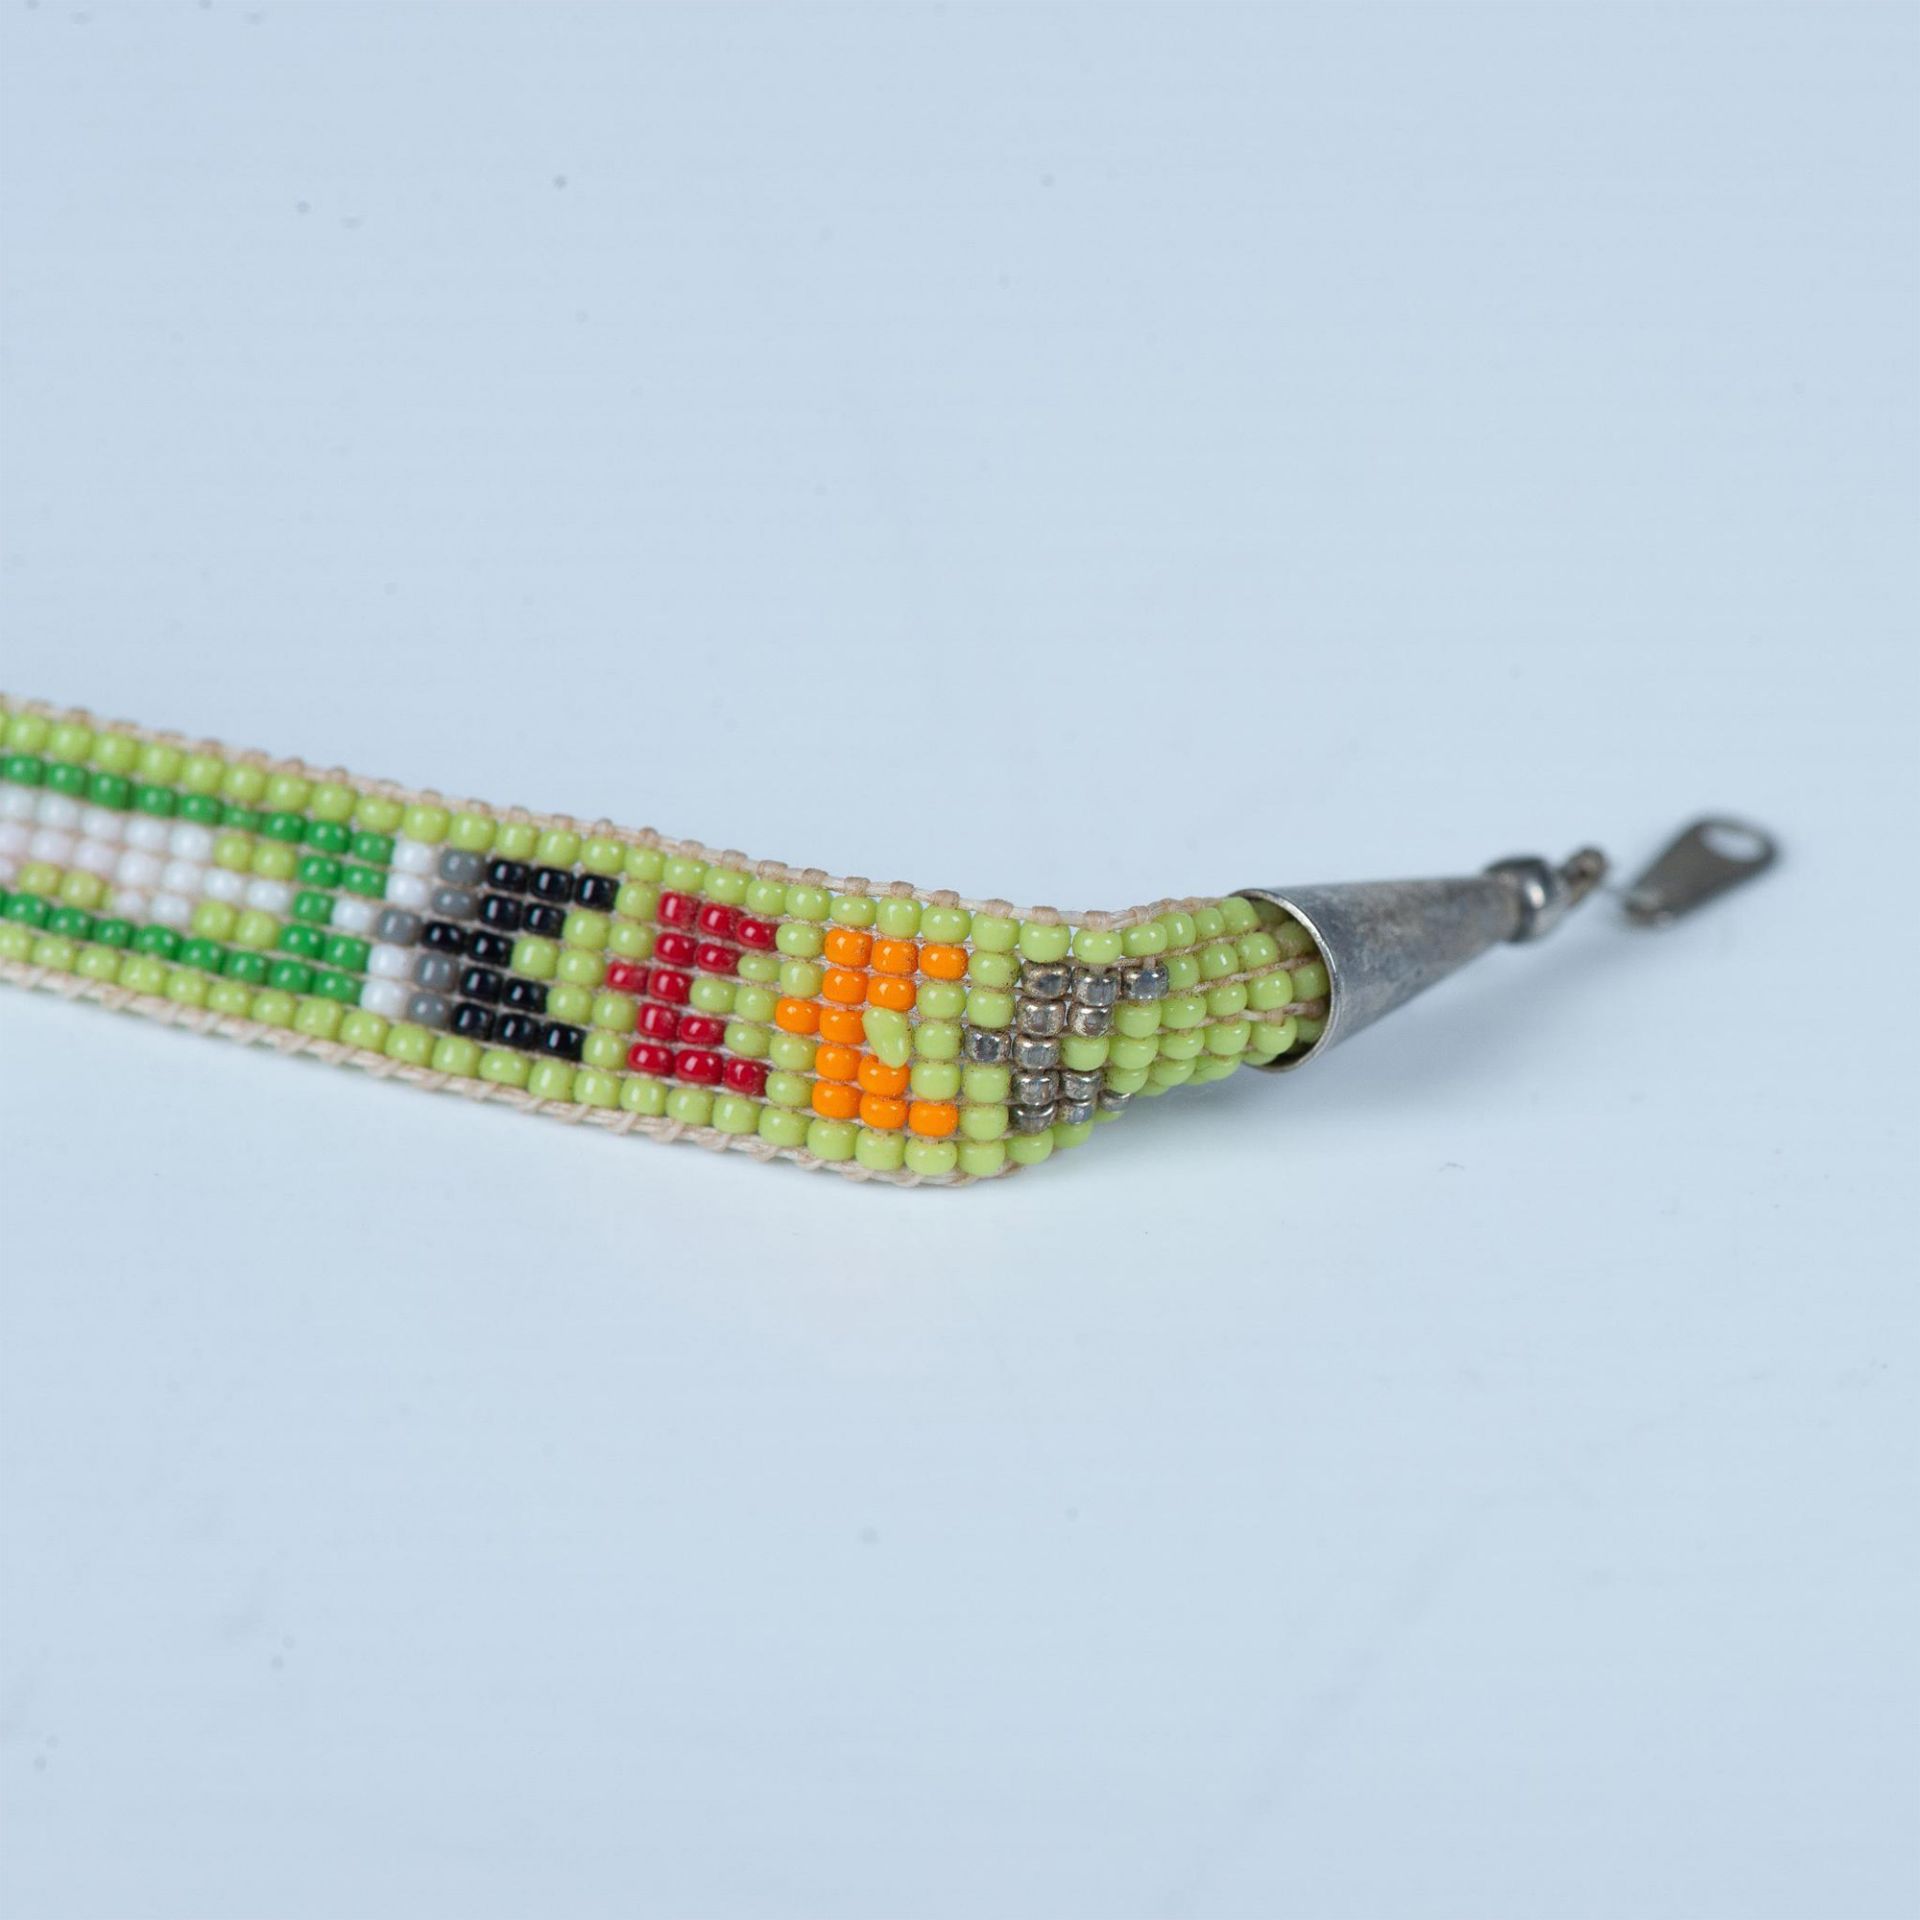 2pc Native American Hand-Woven Bead Bracelets - Image 5 of 5